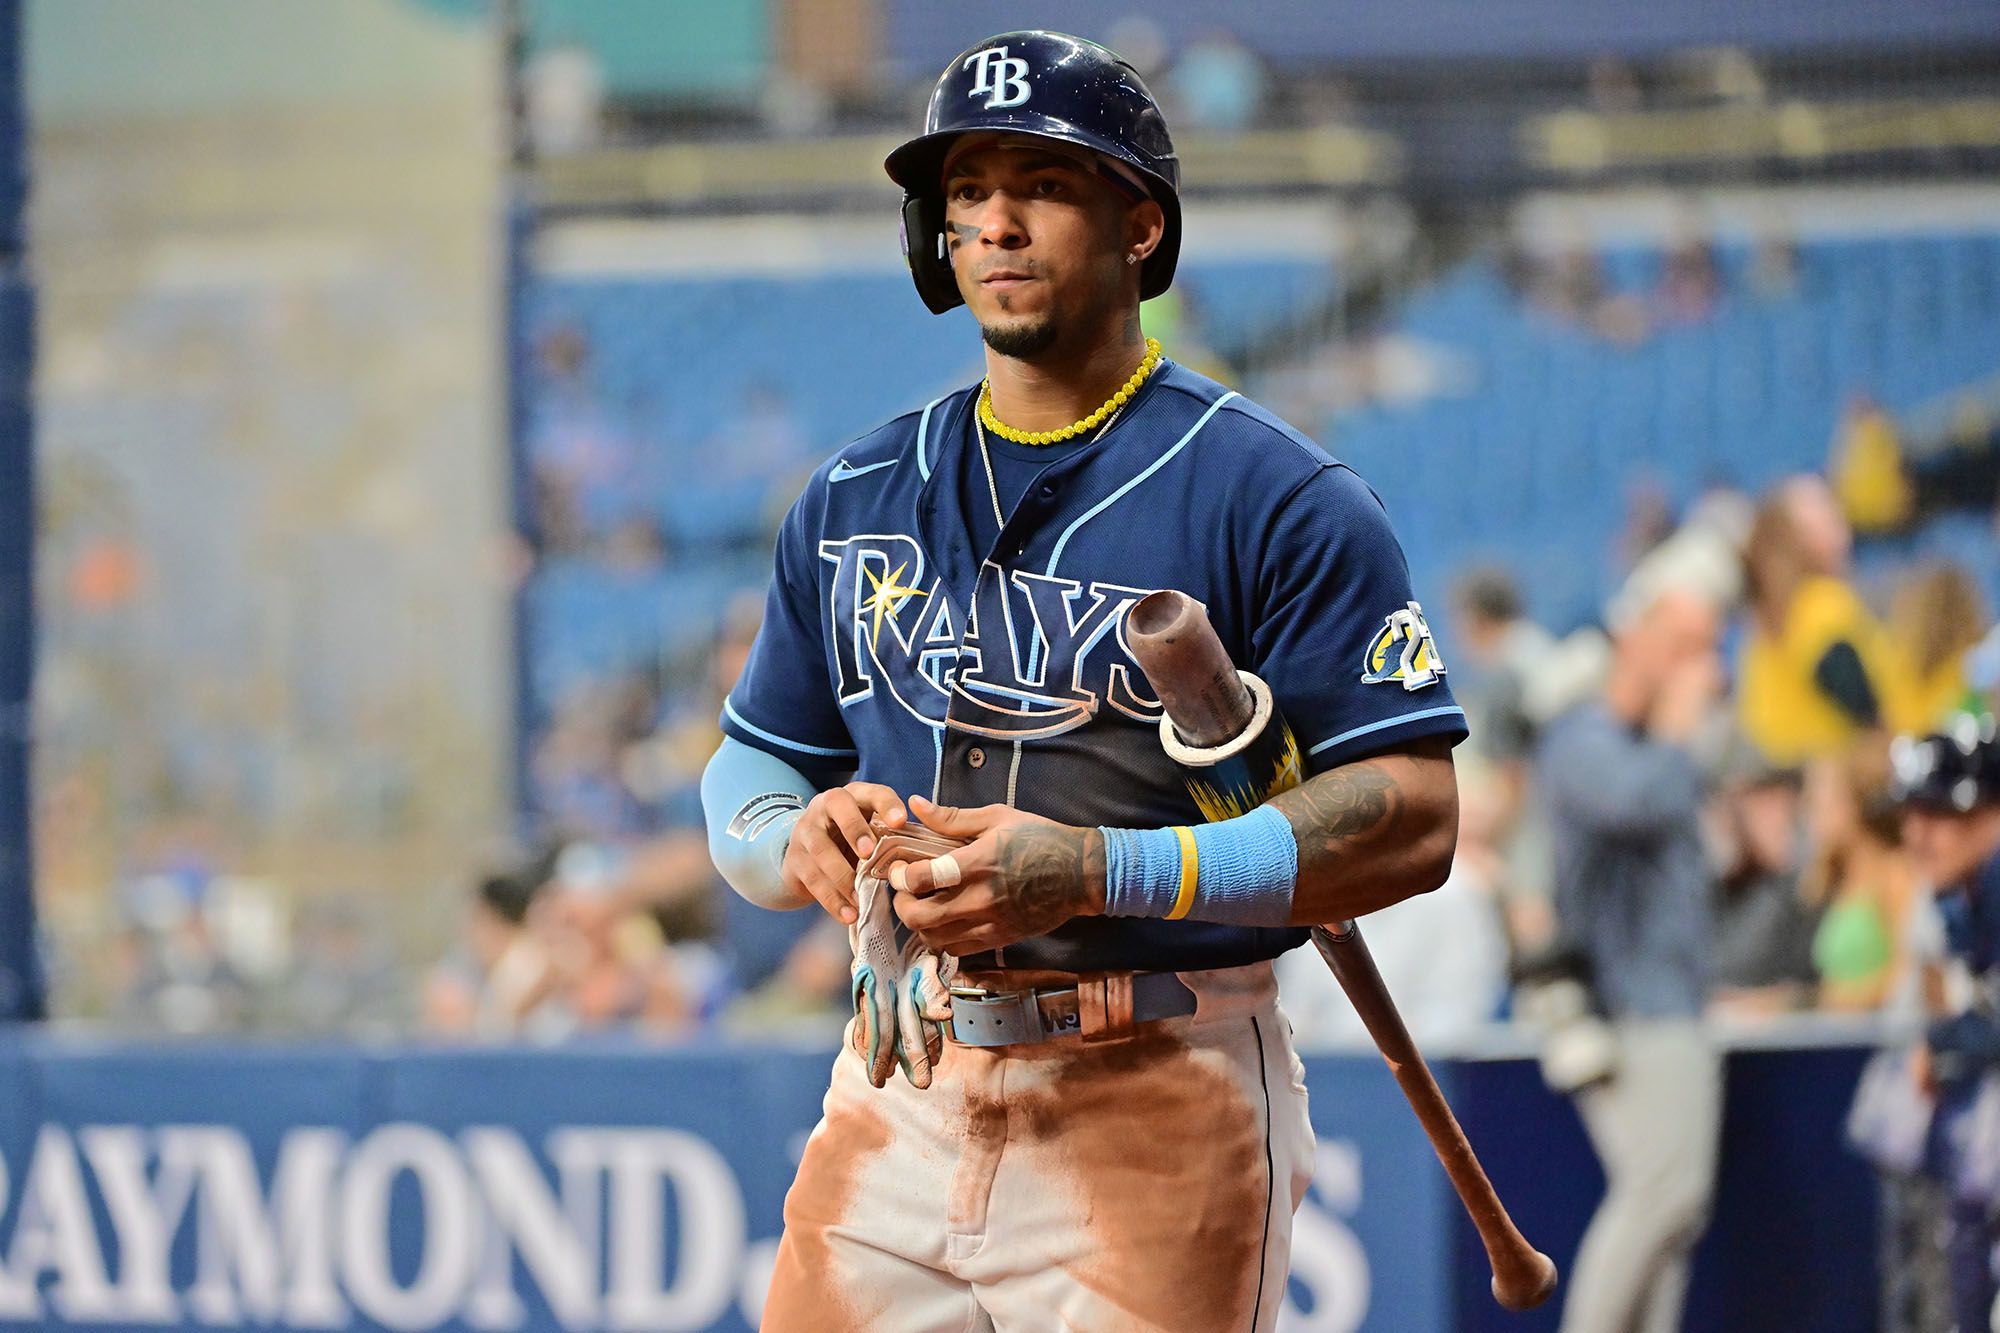 Home Run Streak Has Tampa Bay Rays On Doorstep Of Another Record